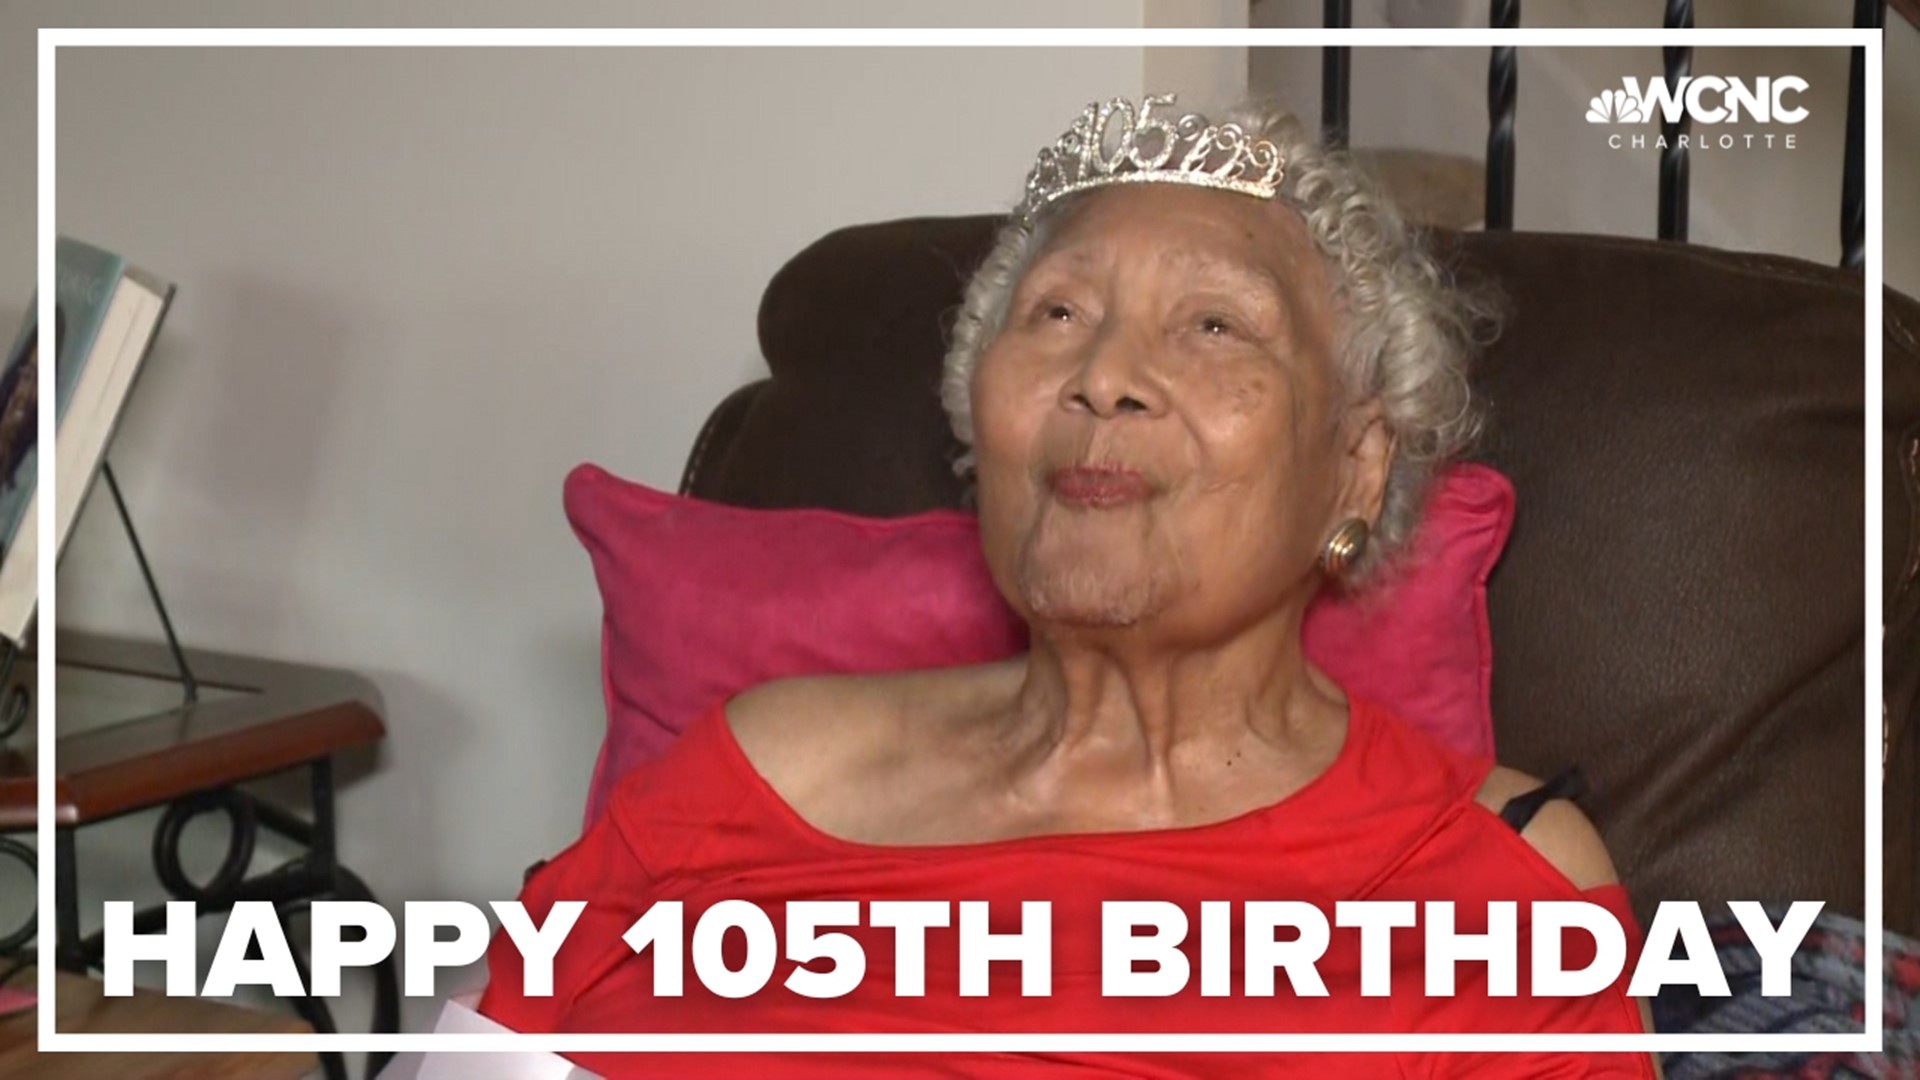 Ms. Gussie grew up on a farm in South Carolina and celebrated her 105th birthday Wednesday with her family in Huntersville.